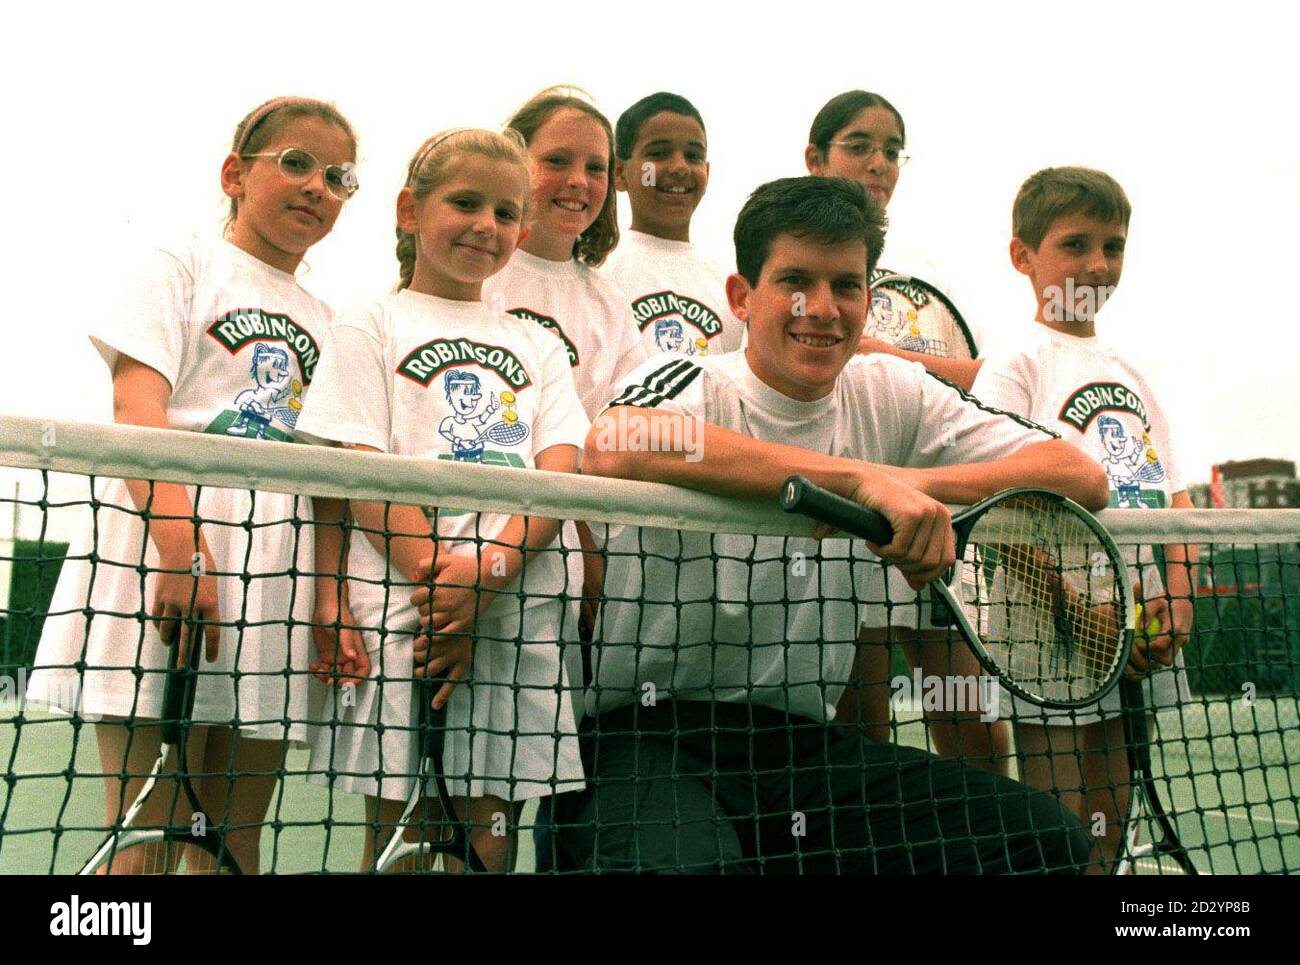 PA NEWS PHOTO 8/6/98 BRITISH TENNIS STAR TIM HENMAN AT QUEEN'S CLUB, LONDON TO LAUNCH A MAJOR NEW JUNIOR TENNIS INITIATIVE ORGANISED BY ROBINSONS, THE DRINKS COMPANY AND THE LAWN TENNIS ASSOCIATION. THE AIM IS TO ATTRACT MORE CHILDREN TO THE GAME Stock Photo